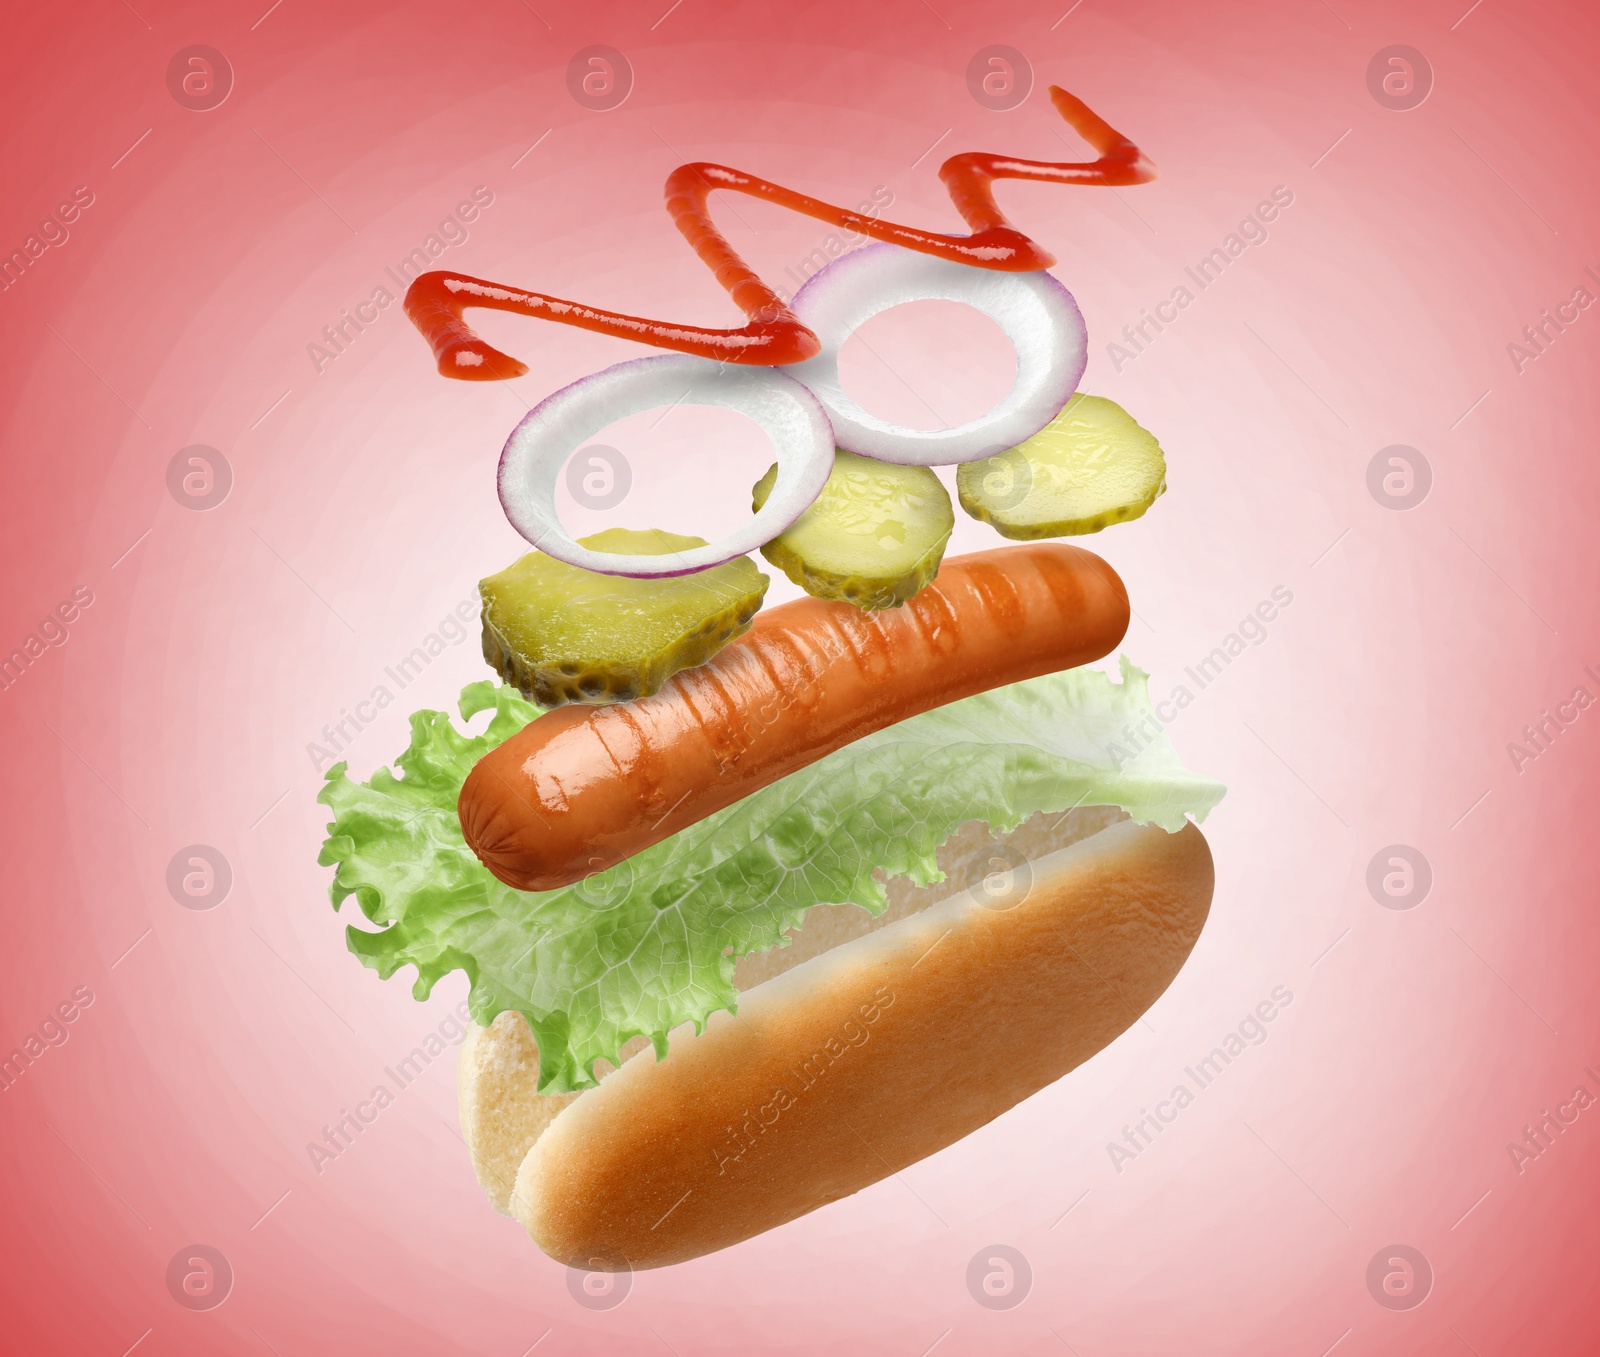 Image of Hot dog ingredients in air on red gradient background